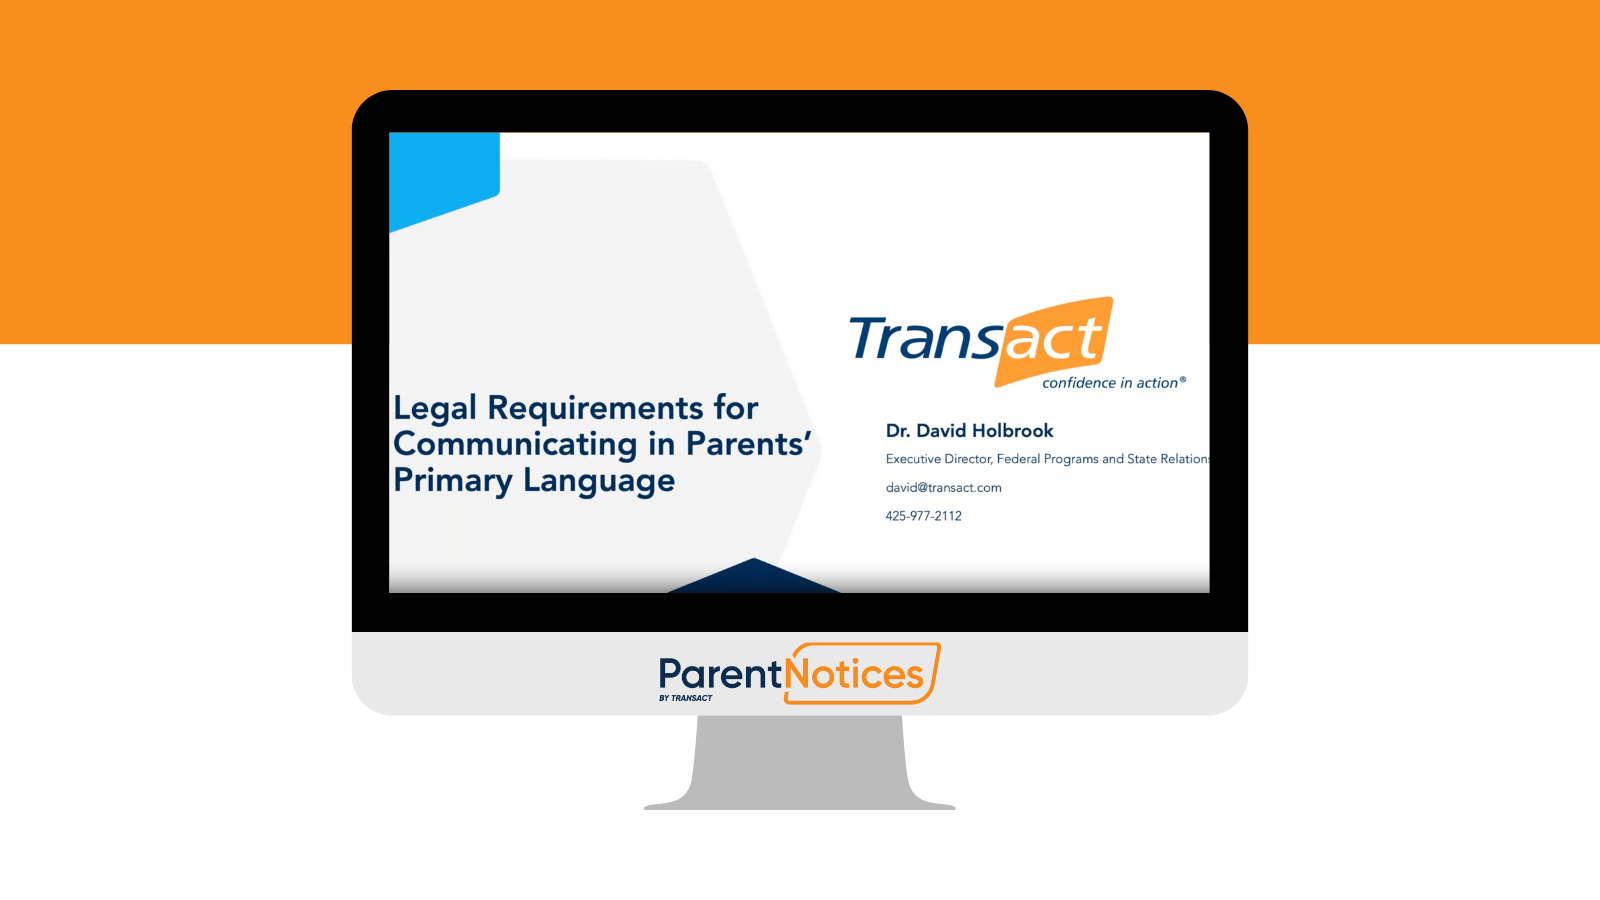 Legal Requirements for Providing Communications in Parents’ Primary Language